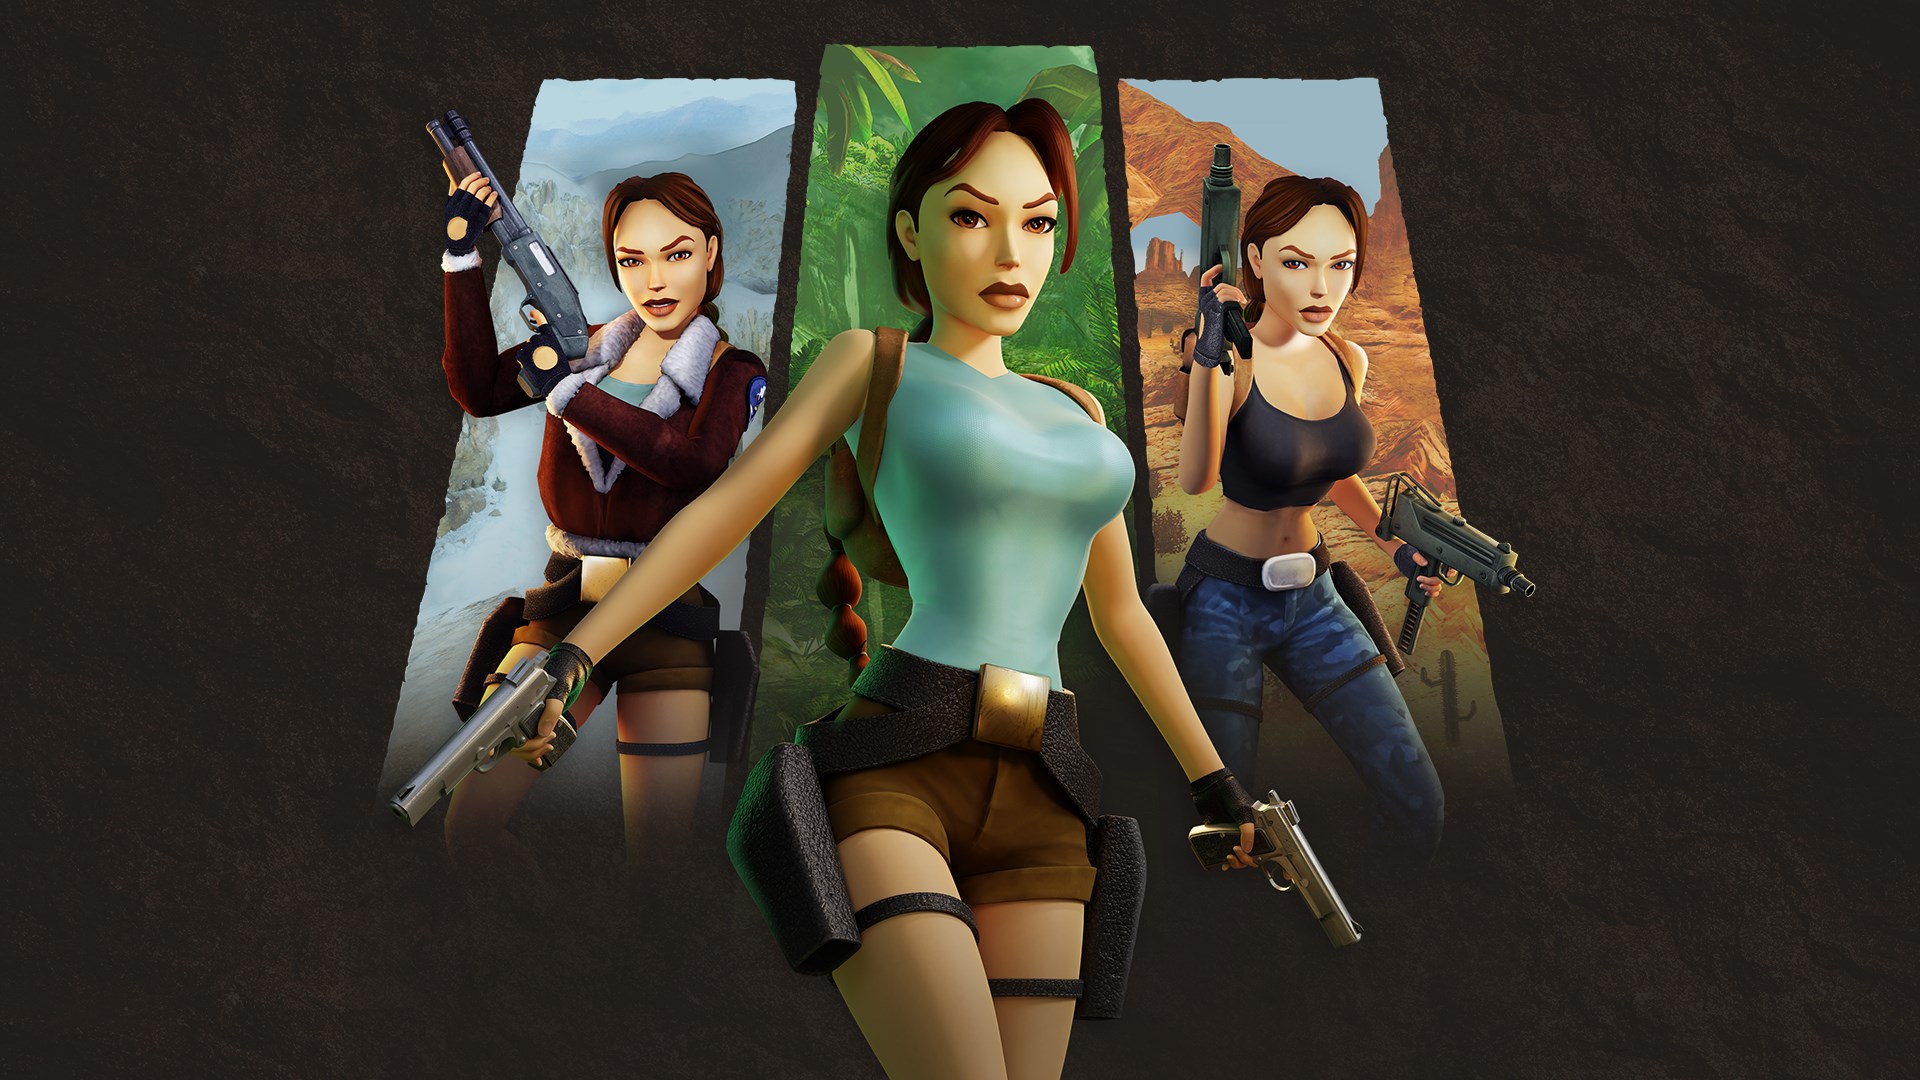 Tomb Raider I-III Remastered PS4 & PS5 features detailed, new key art  revealed – PlayStation.Blog